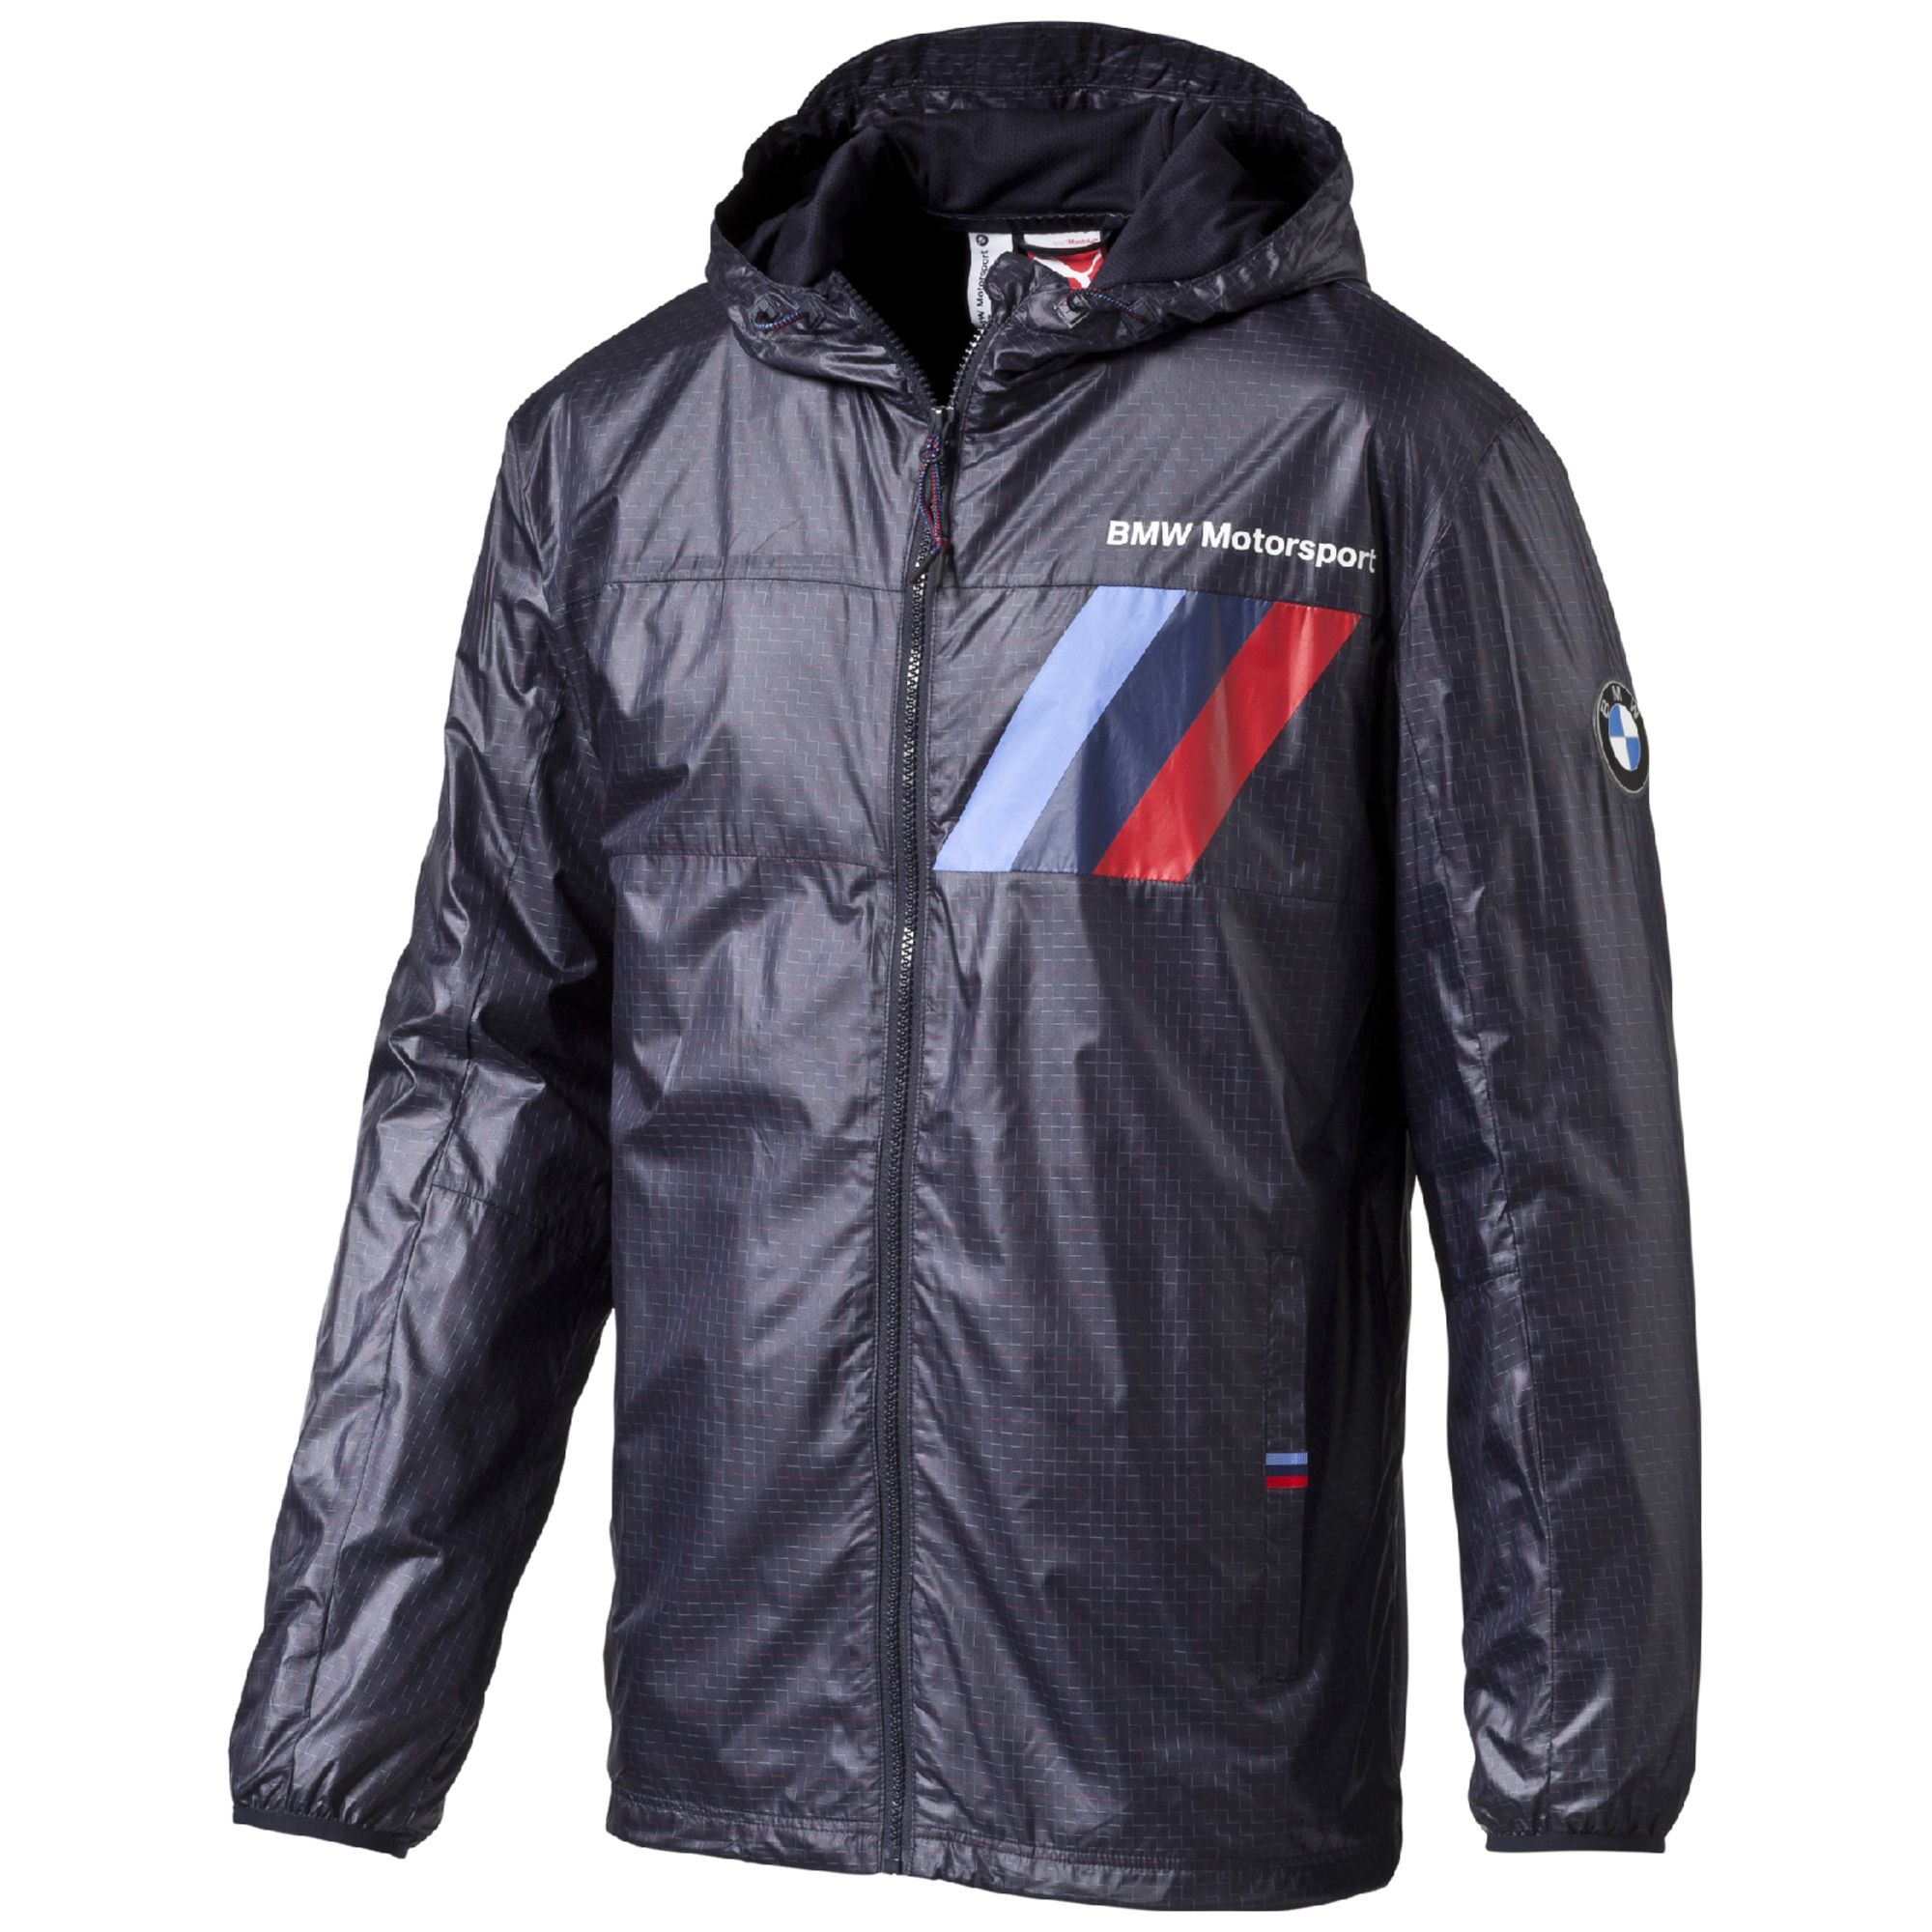 Bmw jackets south africa #1